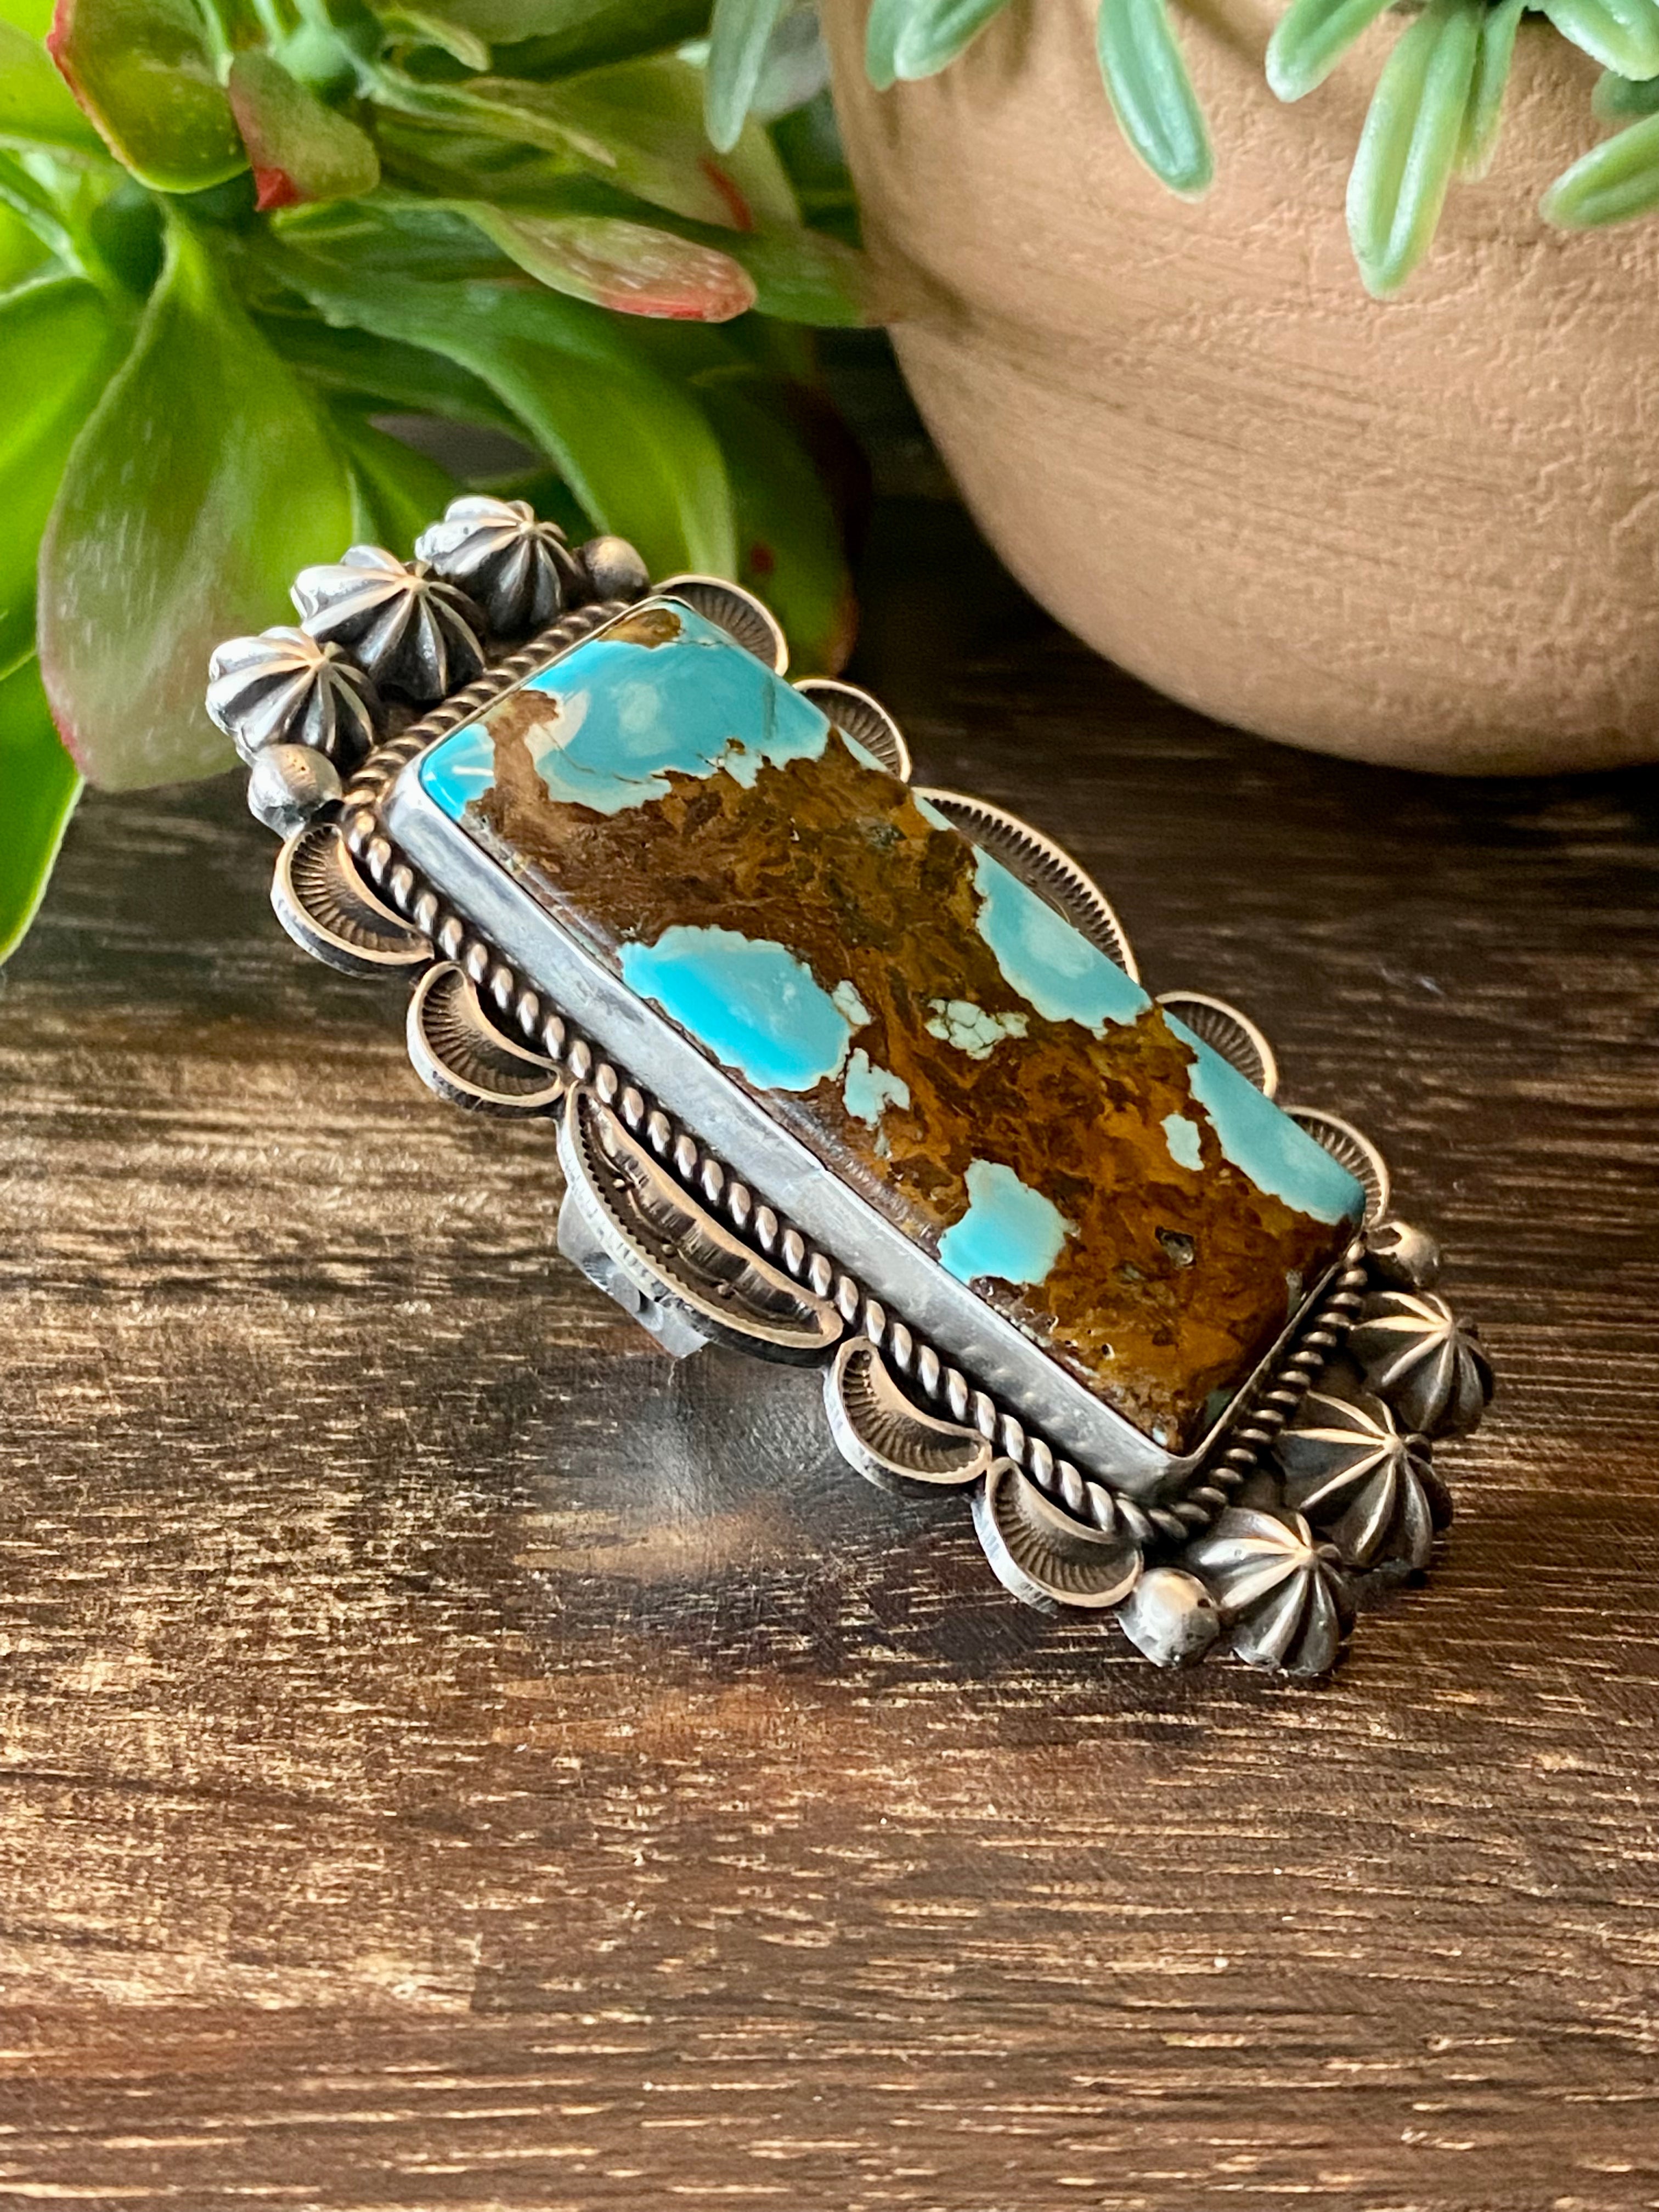 Alex Sanchez Natural #8 Turquoise & Sterling Silver Ring Size 7.5